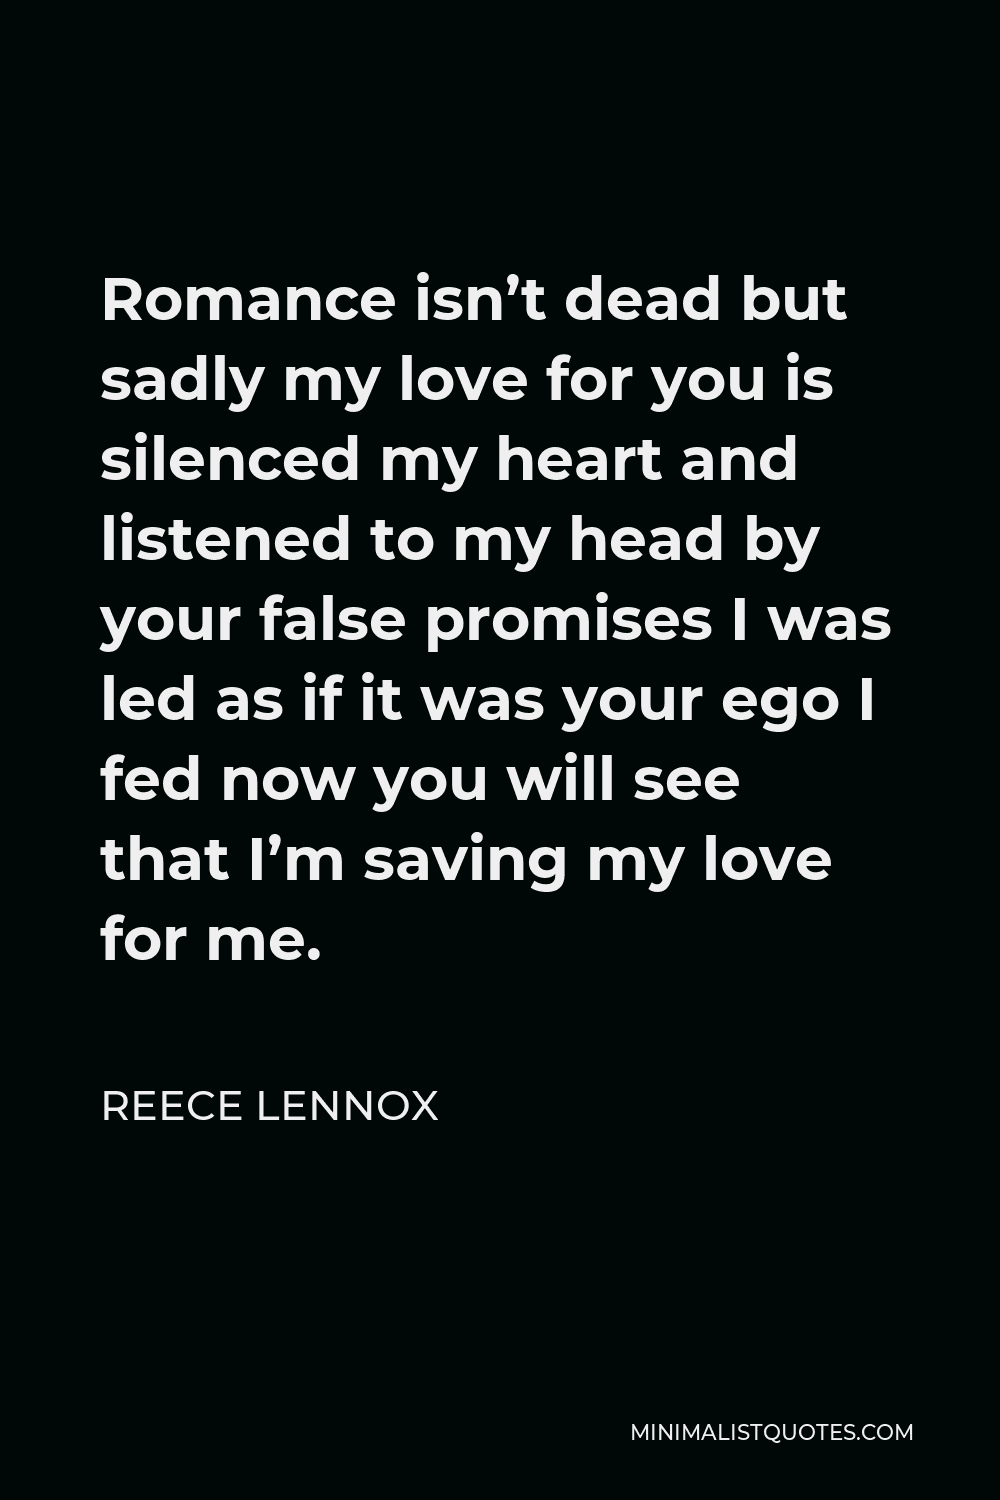 Reece Lennox Quote - Romance isn’t dead but sadly my love for you is silenced my heart and listened to my head by your false promises I was led as if it was your ego I fed now you will see that I’m saving my love for me.